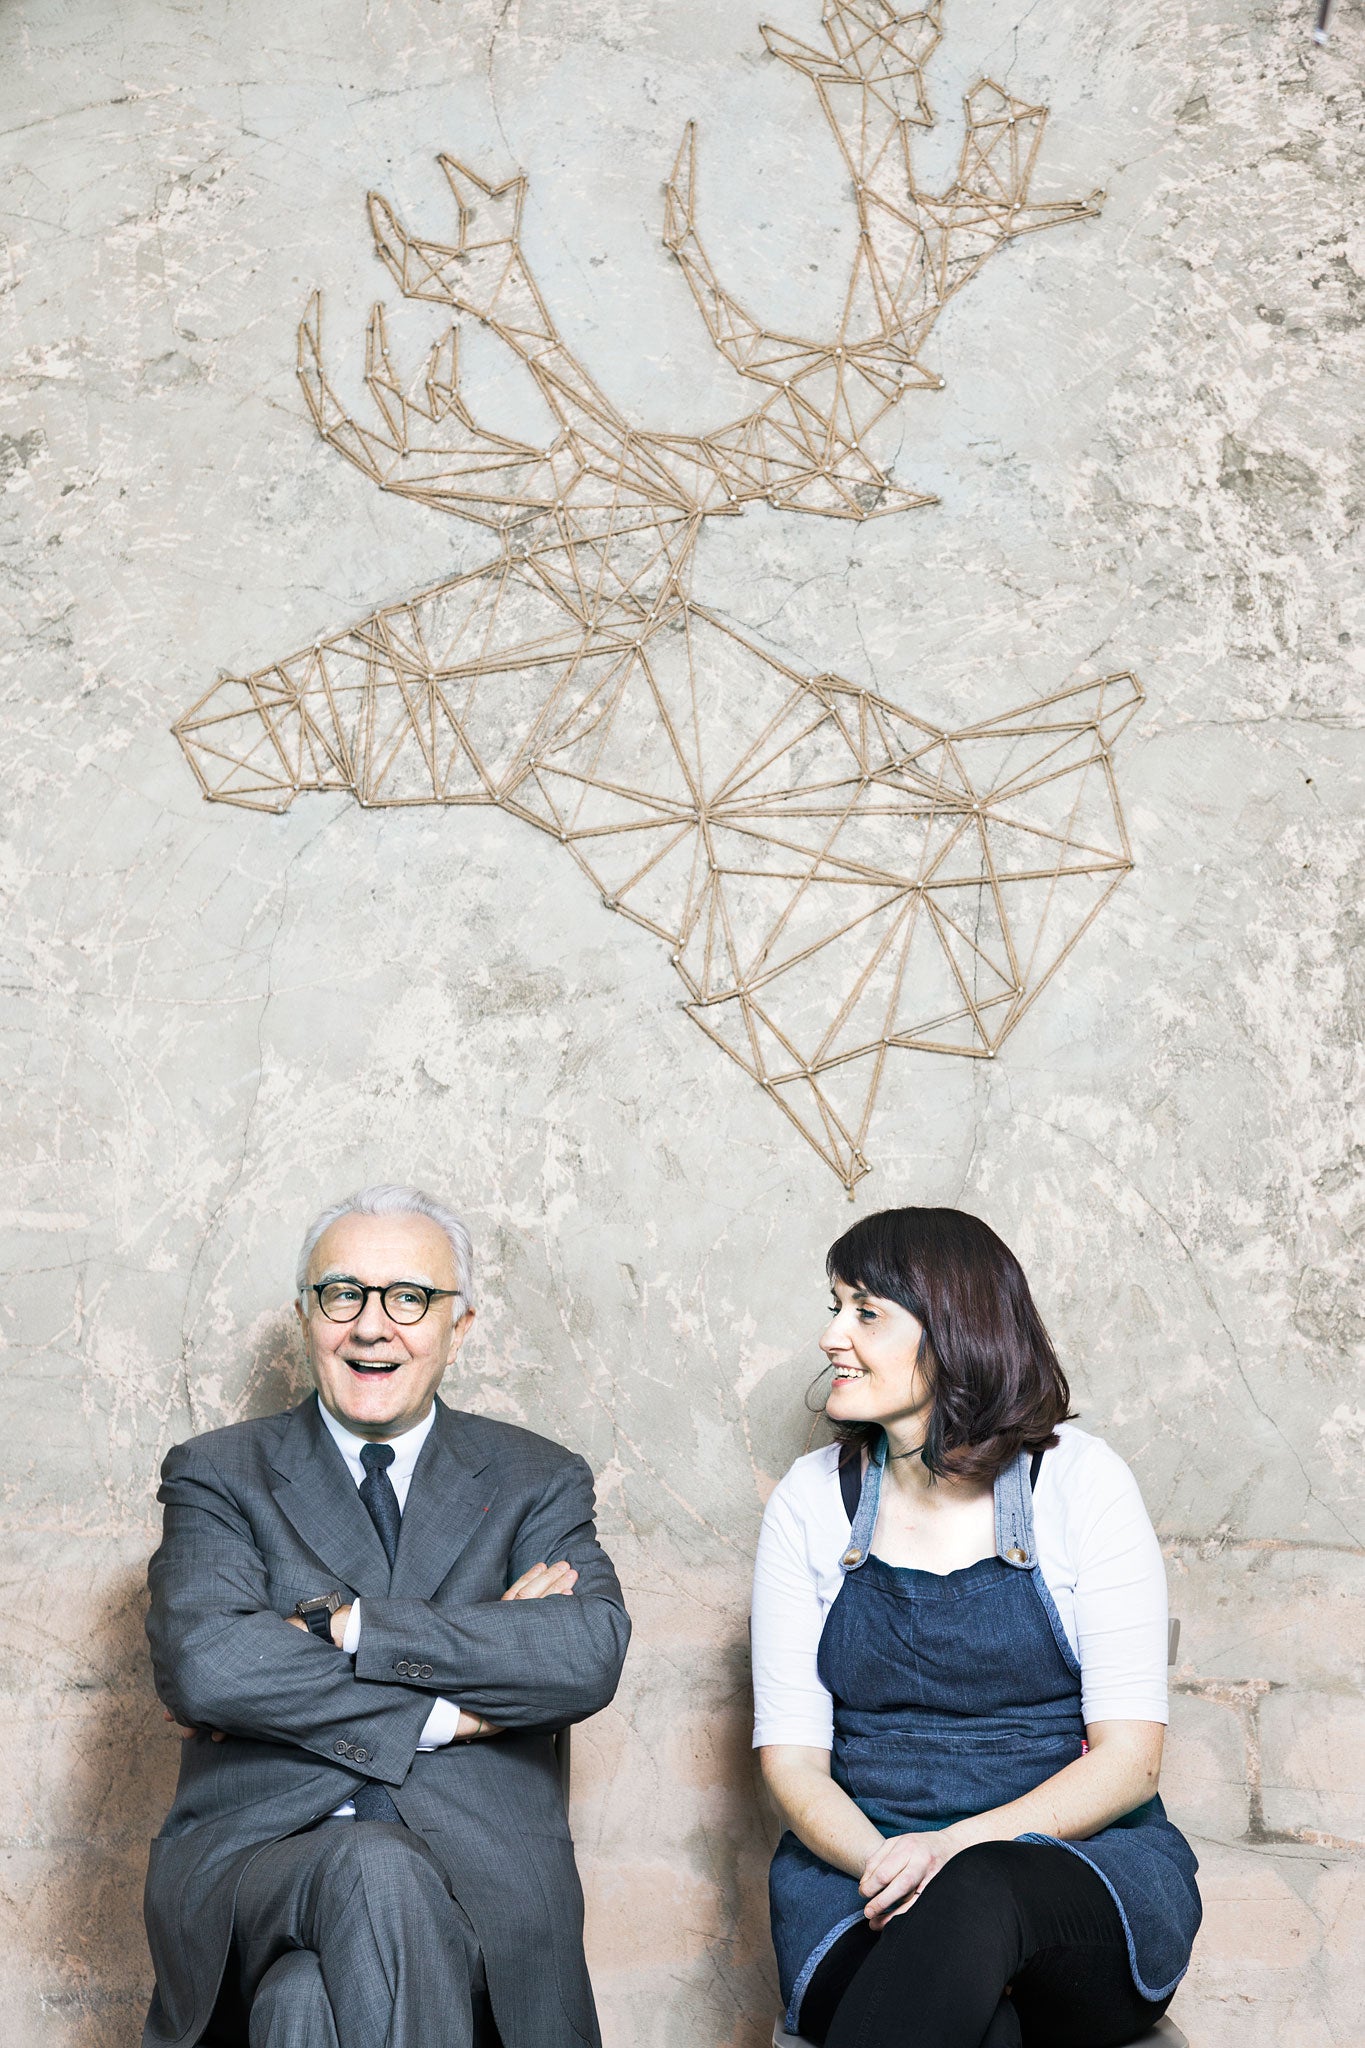 Alain Ducasse with chef Laoise Casey